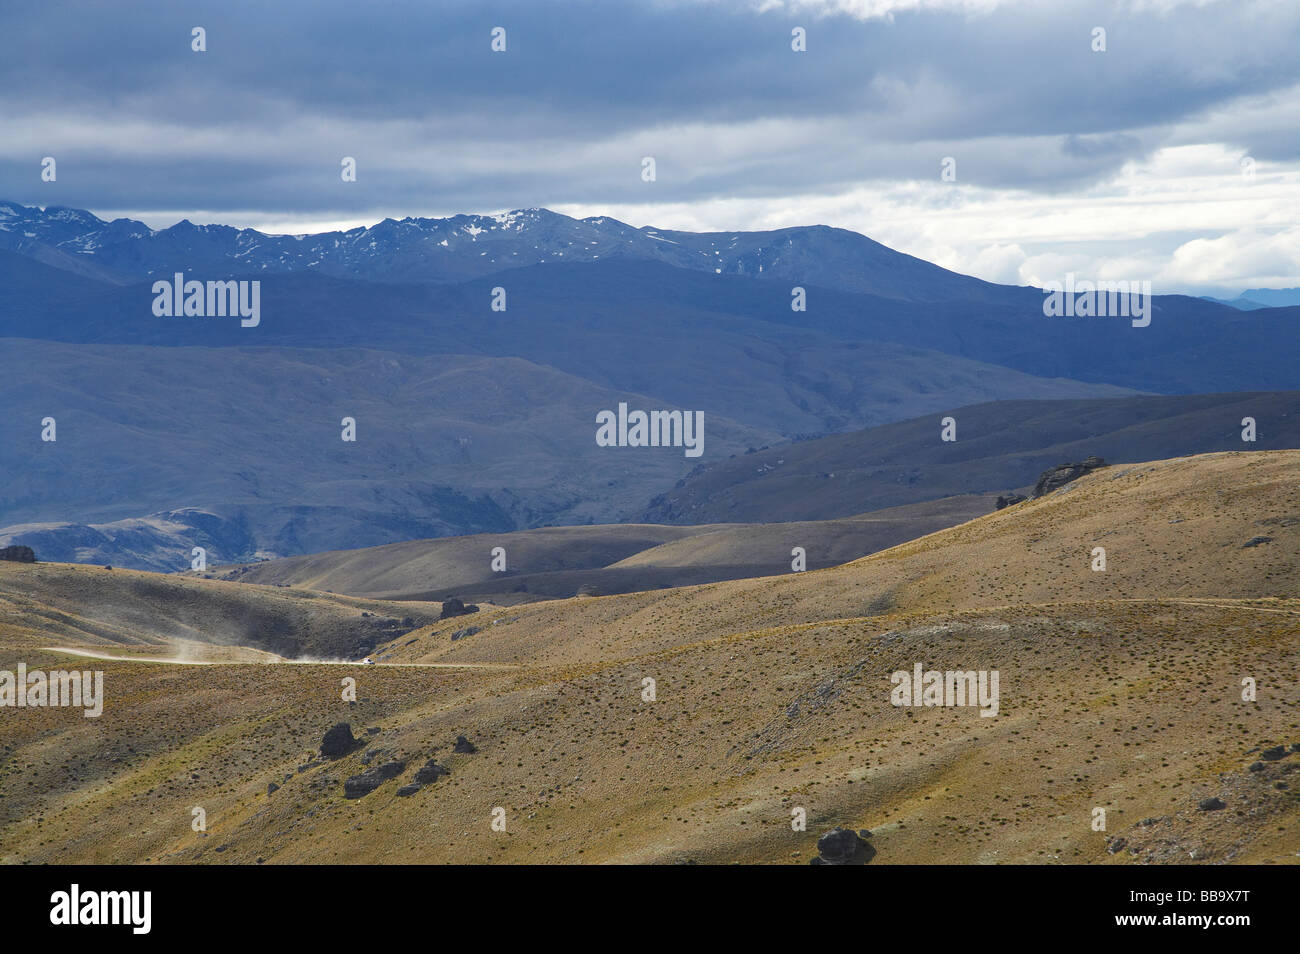 Vehicle on Nevis Road Carrick Range looking towards Nevis Valley and Hector Mountains Central Otago South Island New Zealand Stock Photo